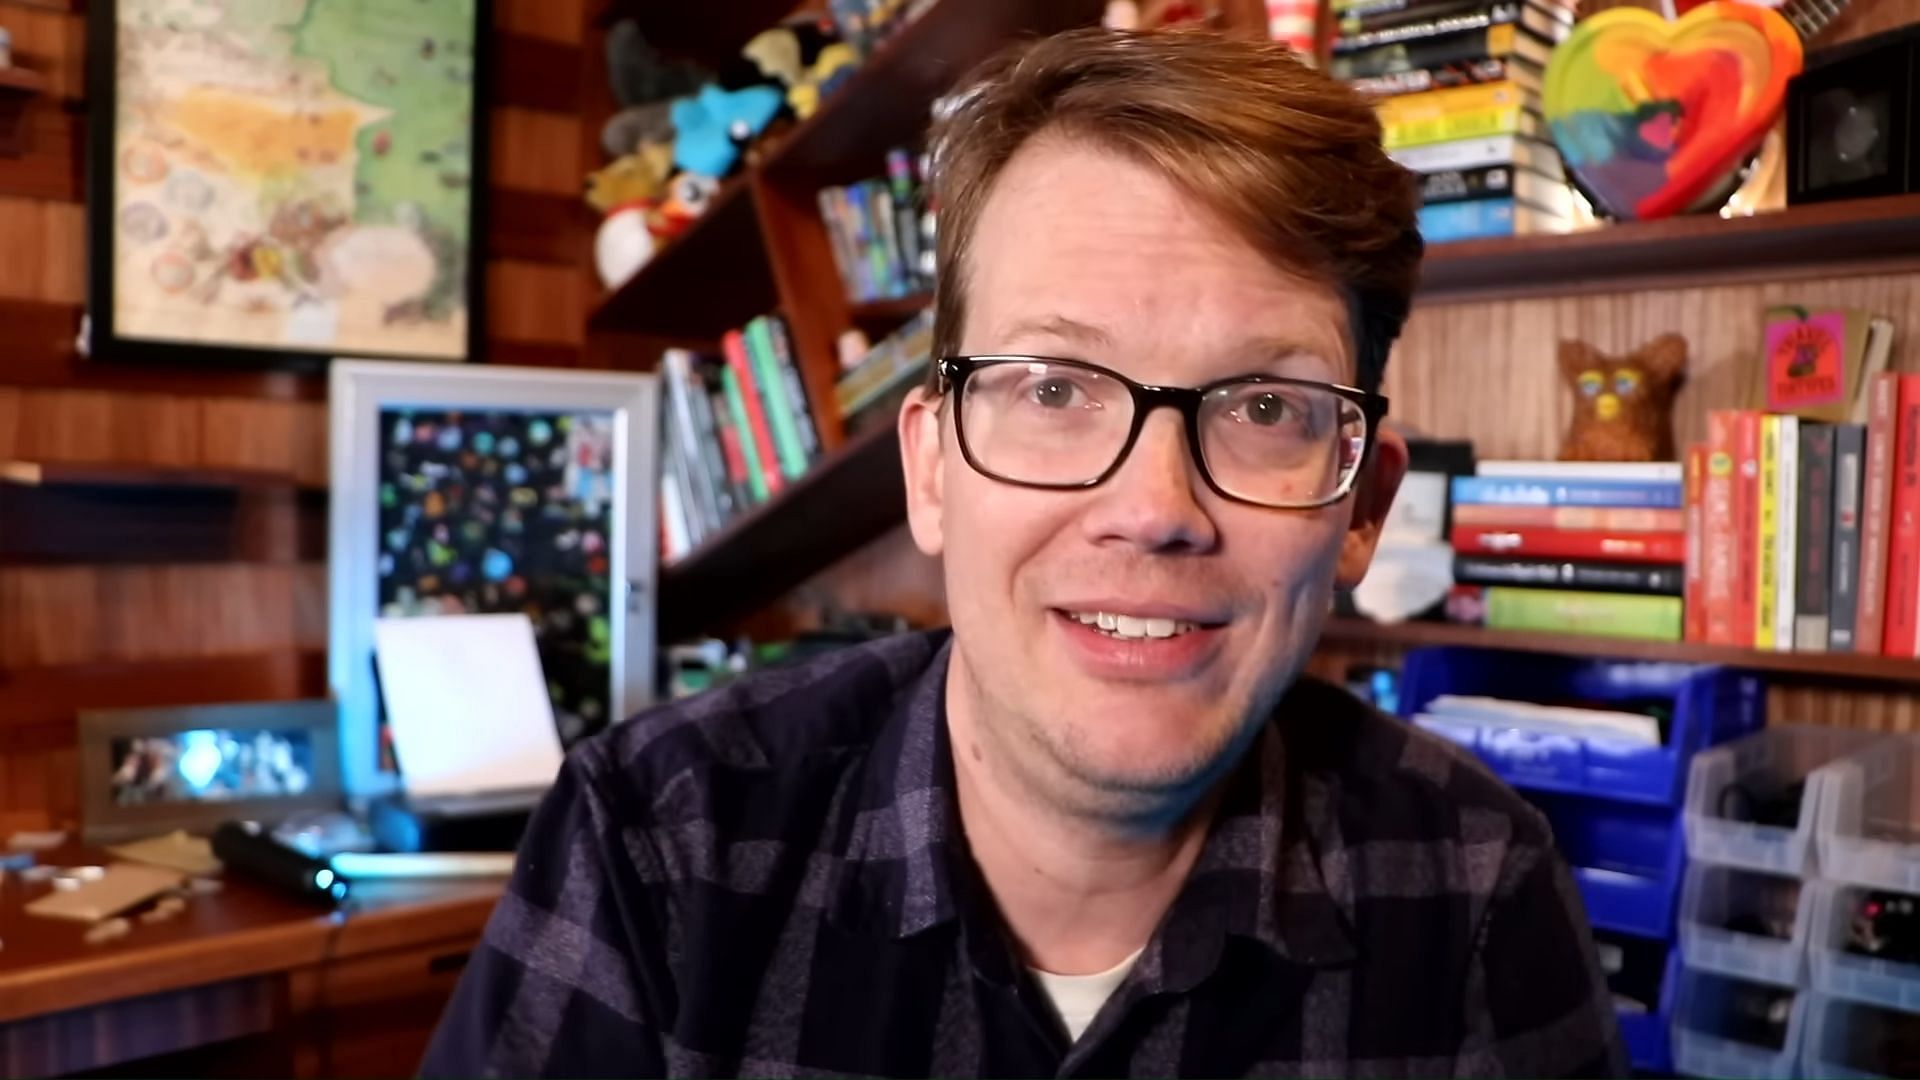 Popular online personality Hank Green has been diagnosed with Hodgkin Lymphoma (Image via vlogbrothers/YouTube)